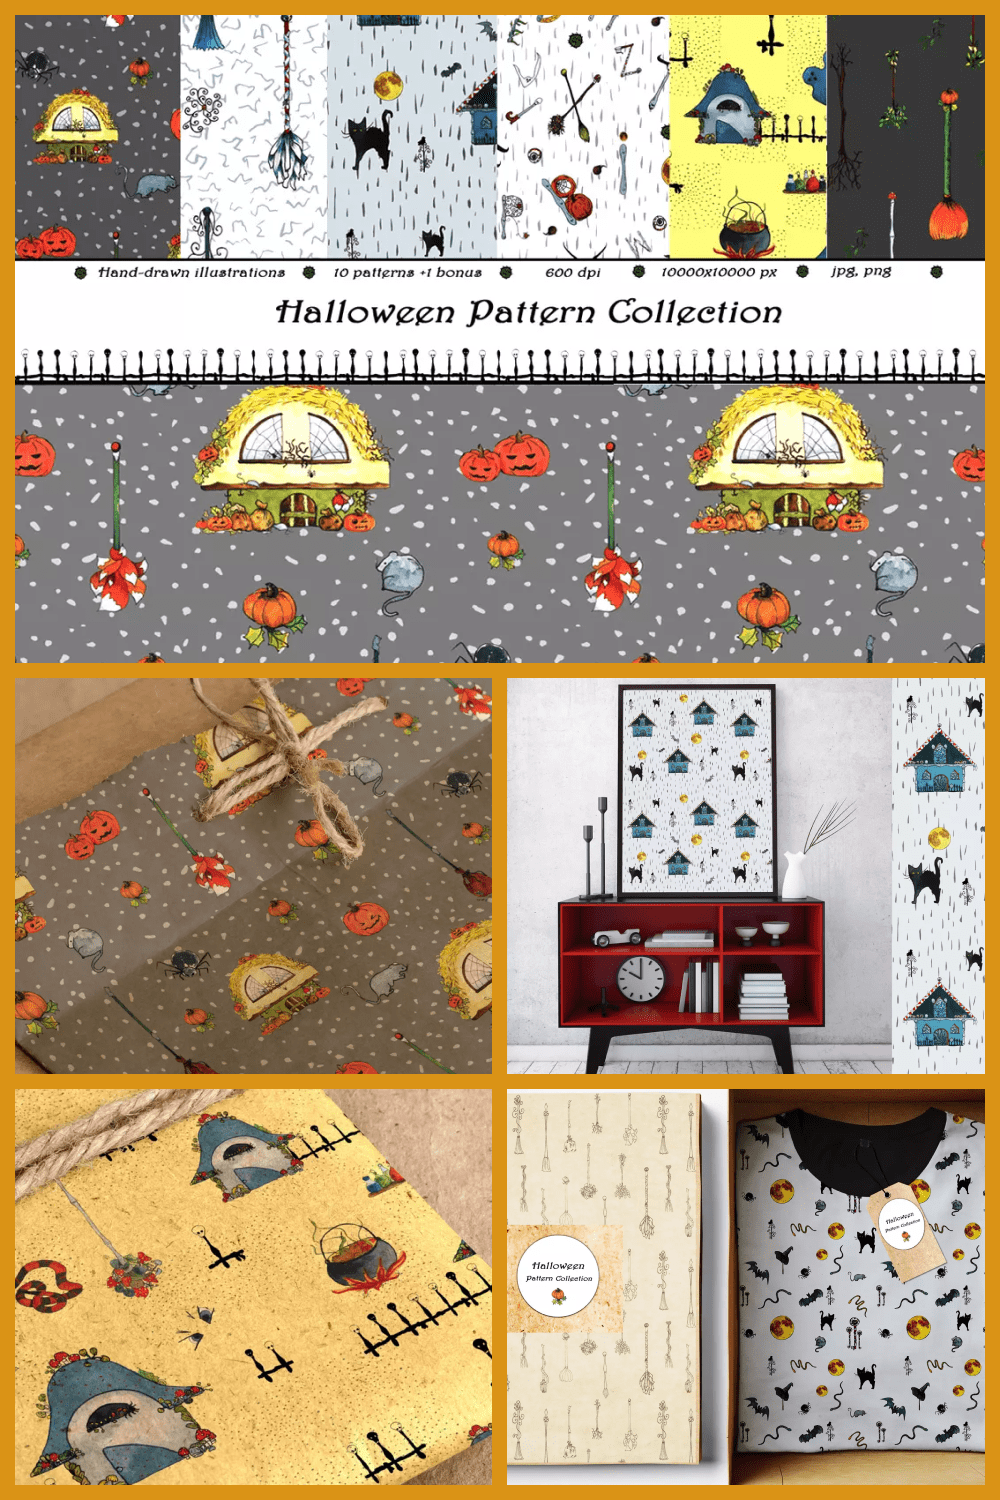 Collage of images with Halloween symbols on gifts, t-shirts and paintings.